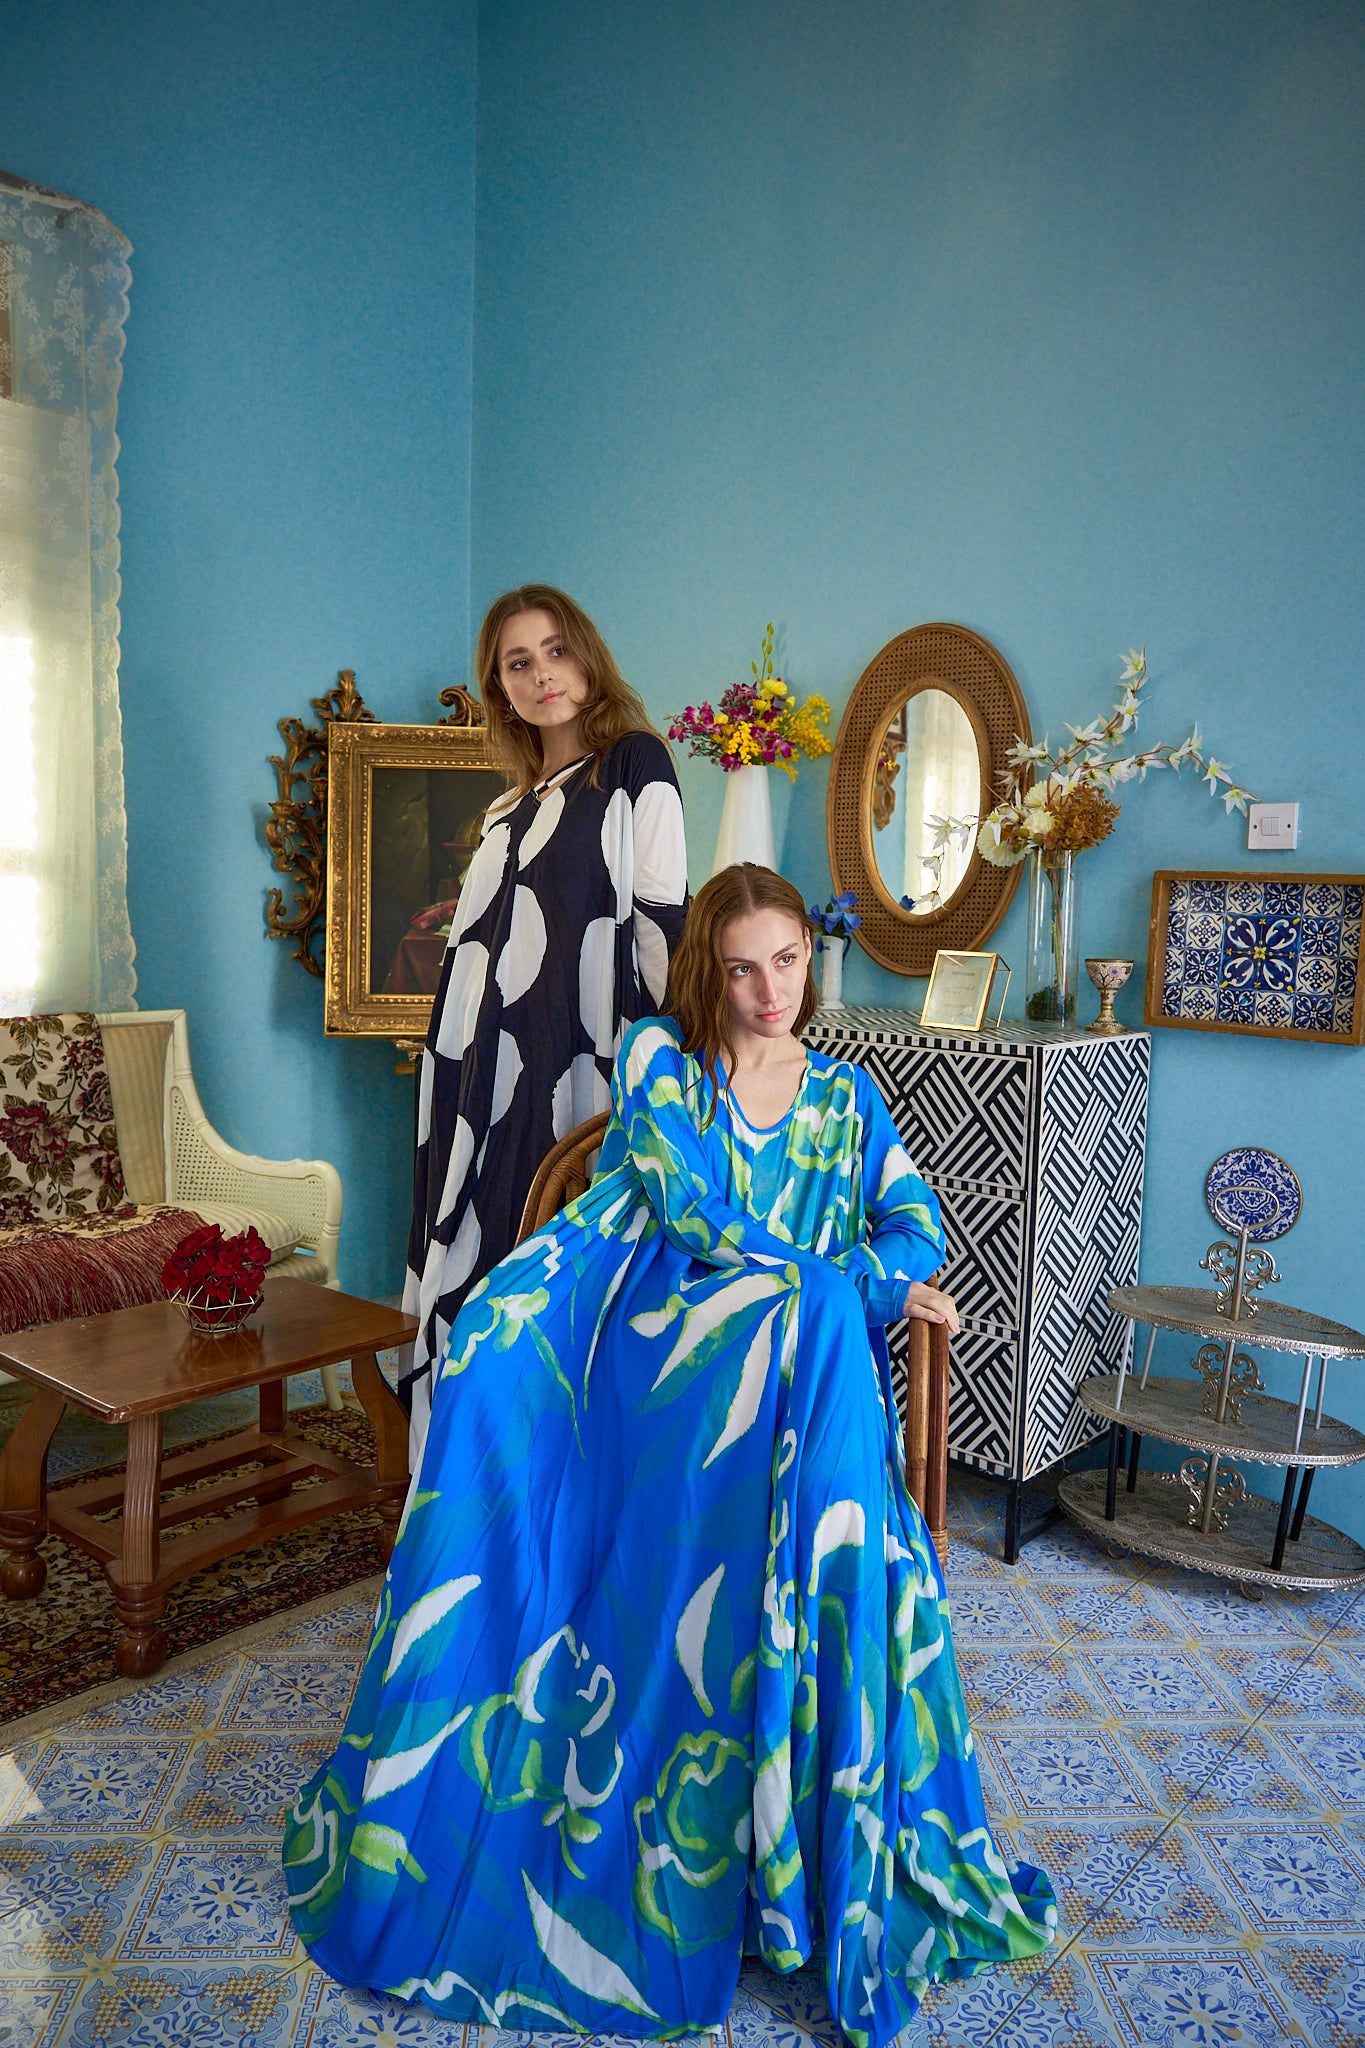 Valeria and Nikola, two stunning models, strike a pose in luxurious Muccii kaftans during a photoshoot in Kuwait.